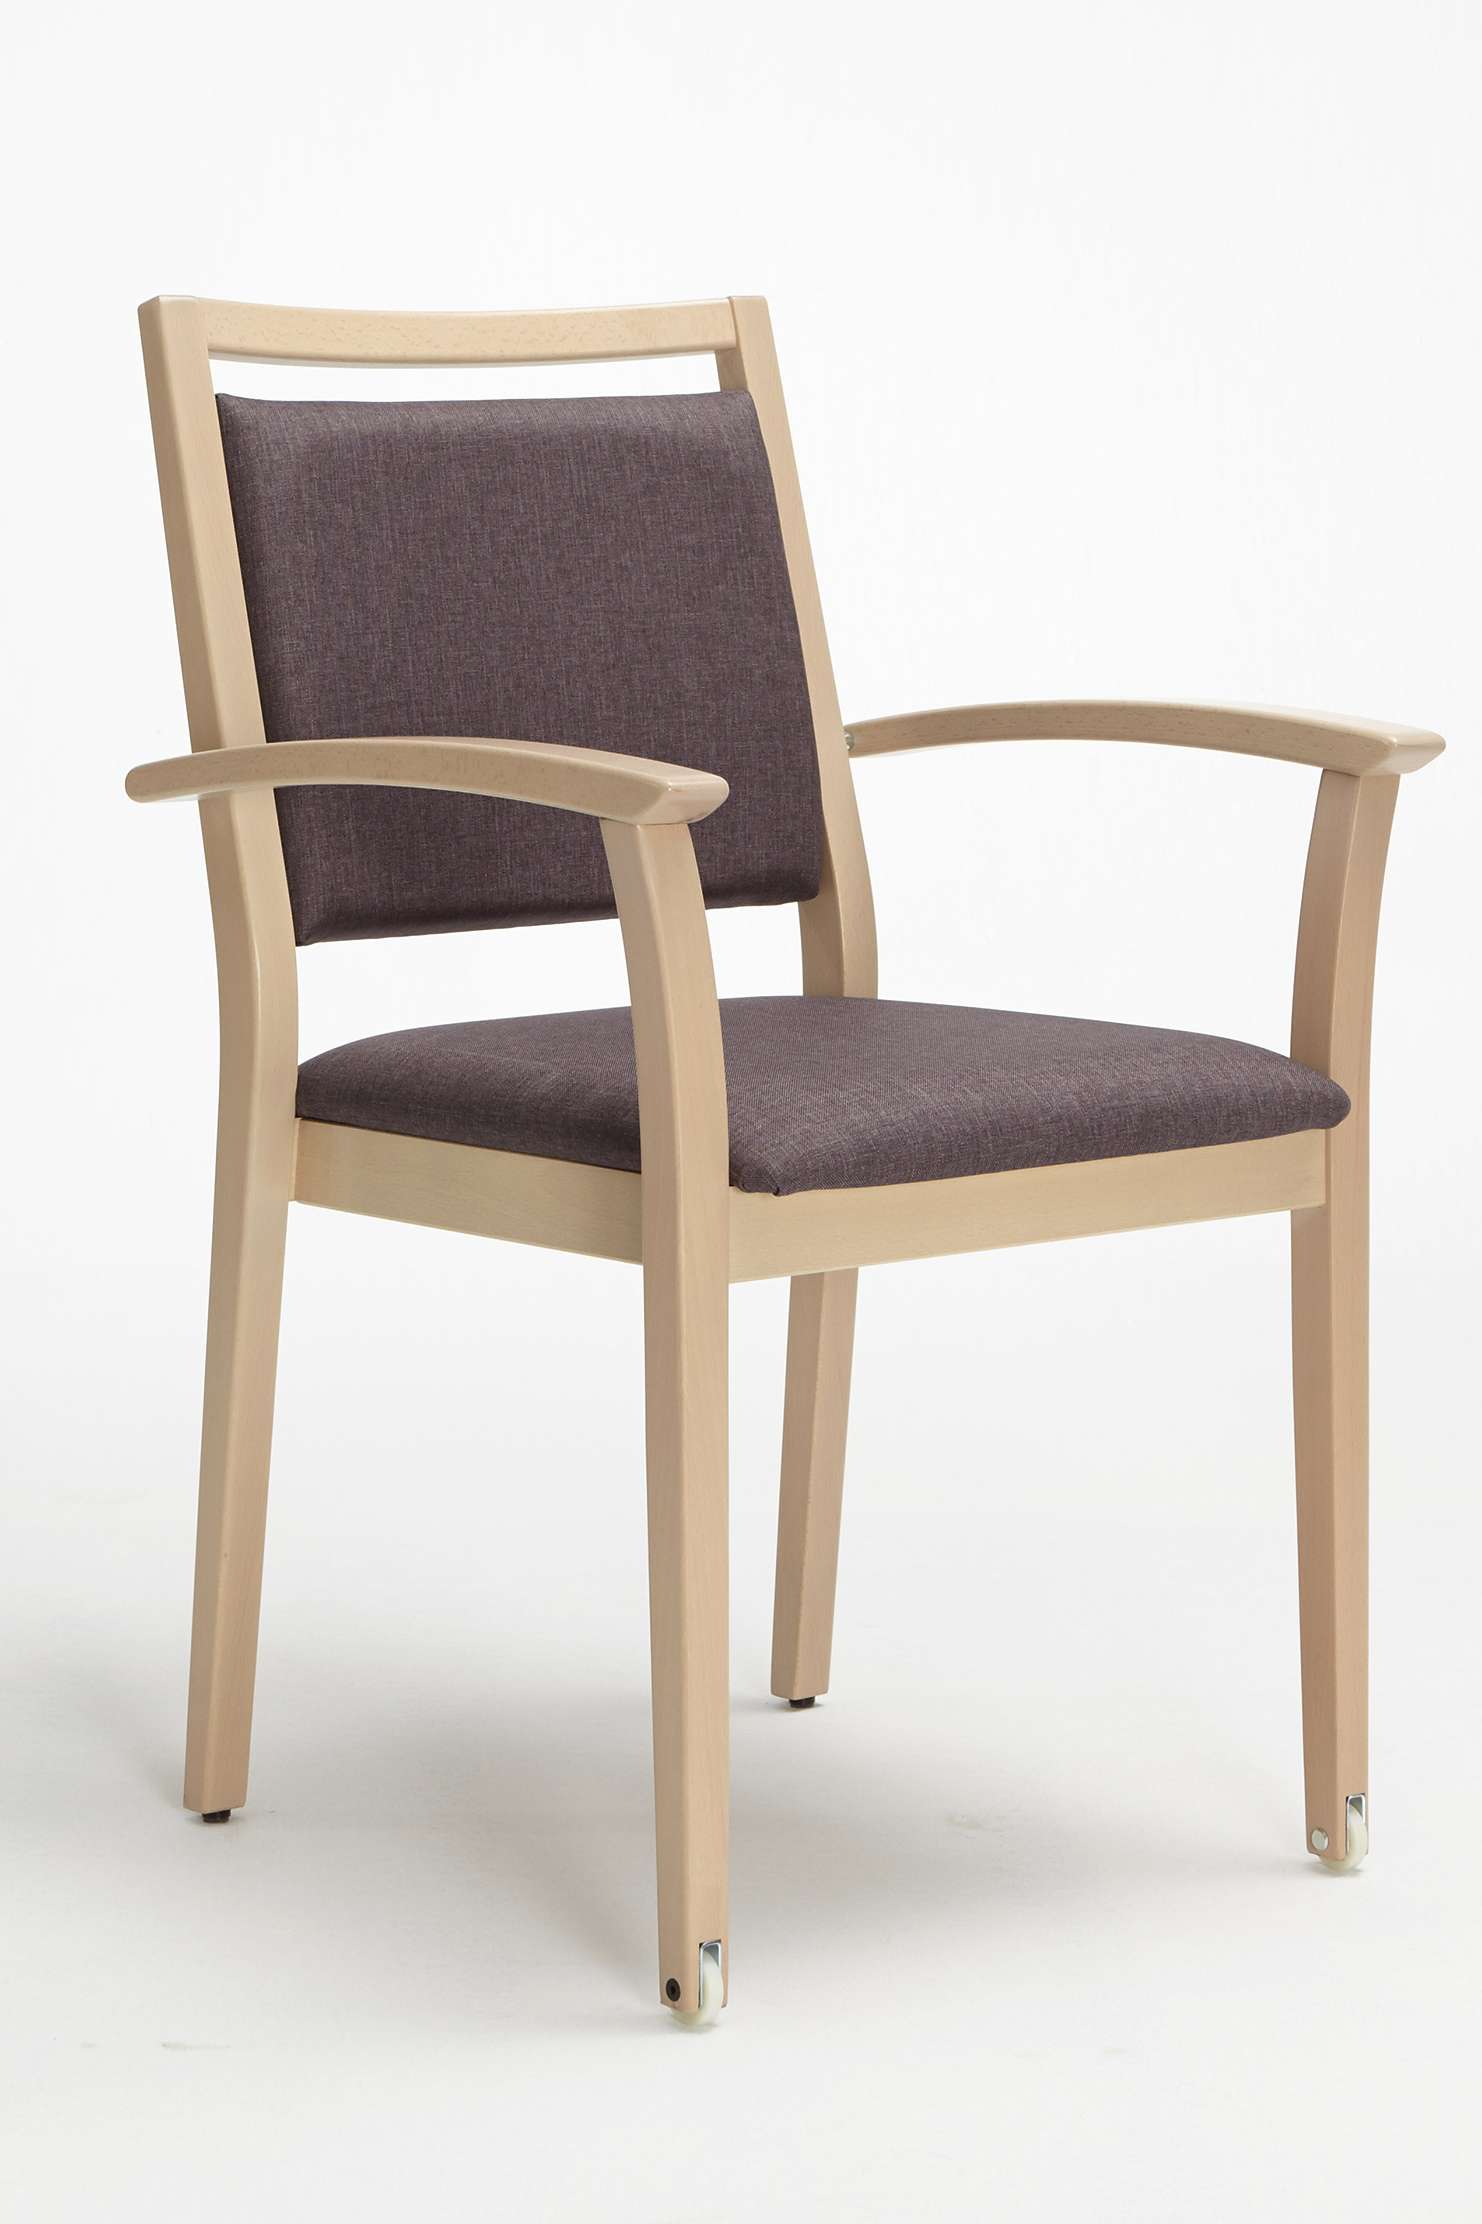 The Mavo model as a stackable chair with armrests